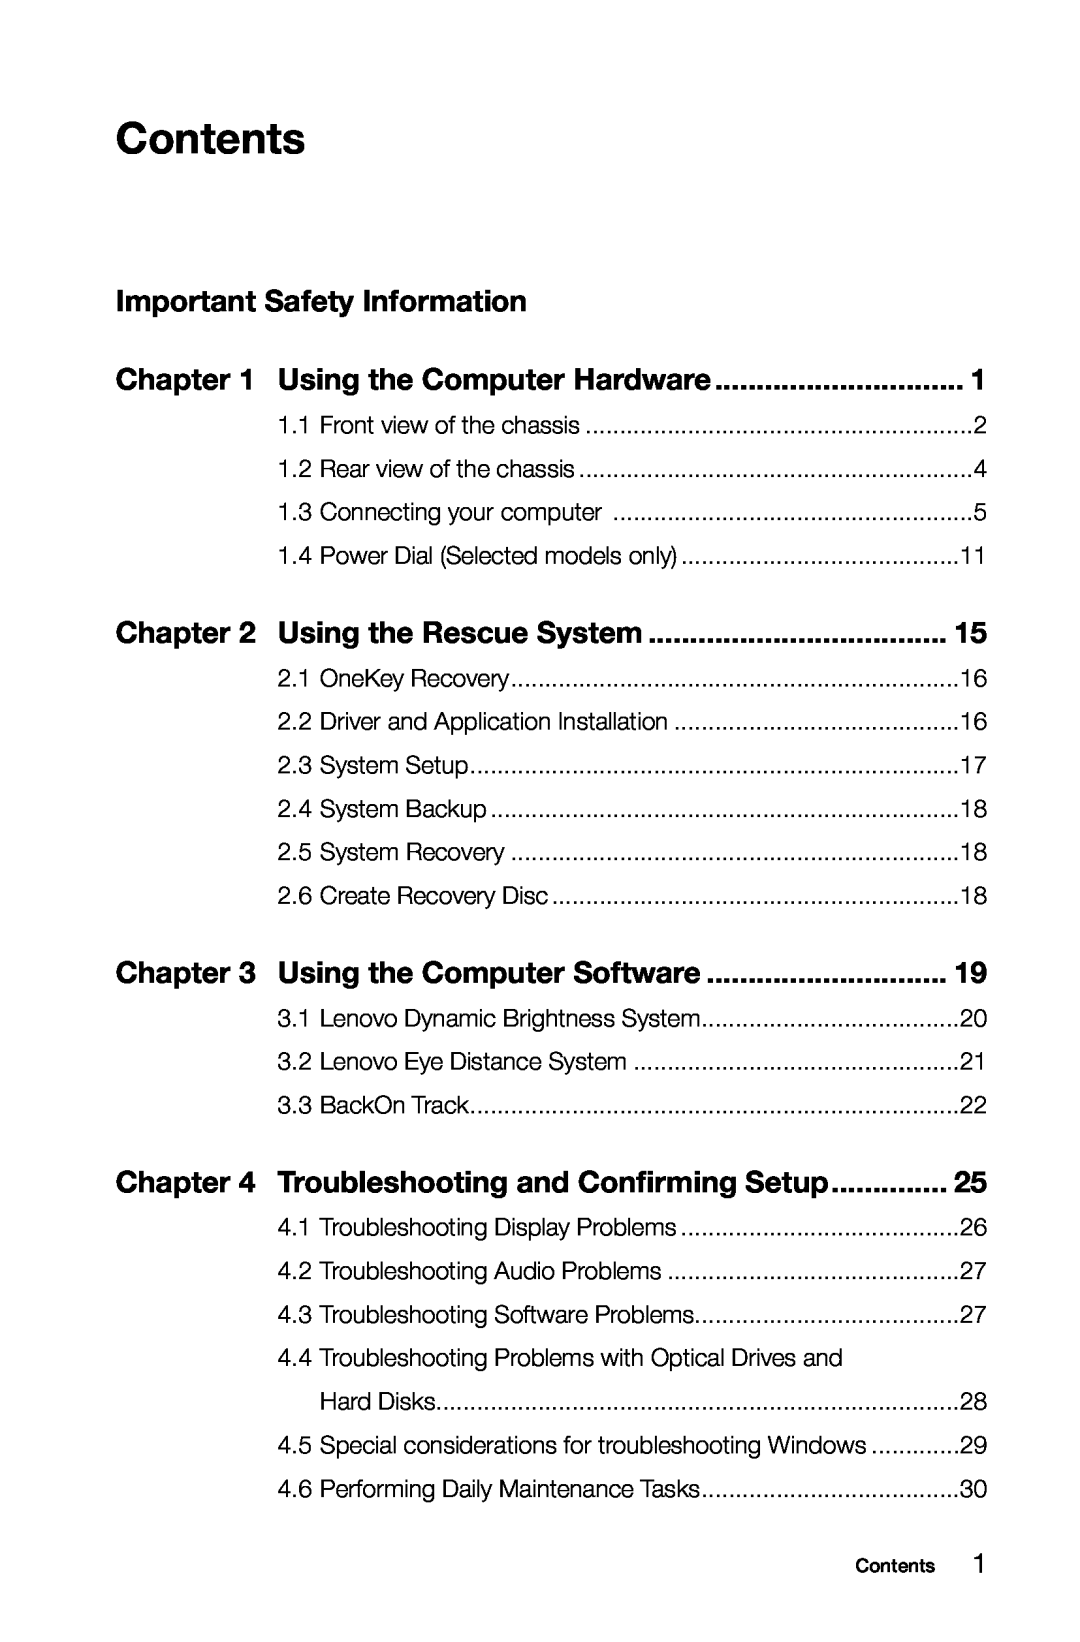 Lenovo K3 manual Contents, Important Safety Information, Using the Rescue System, Using the Computer Software 